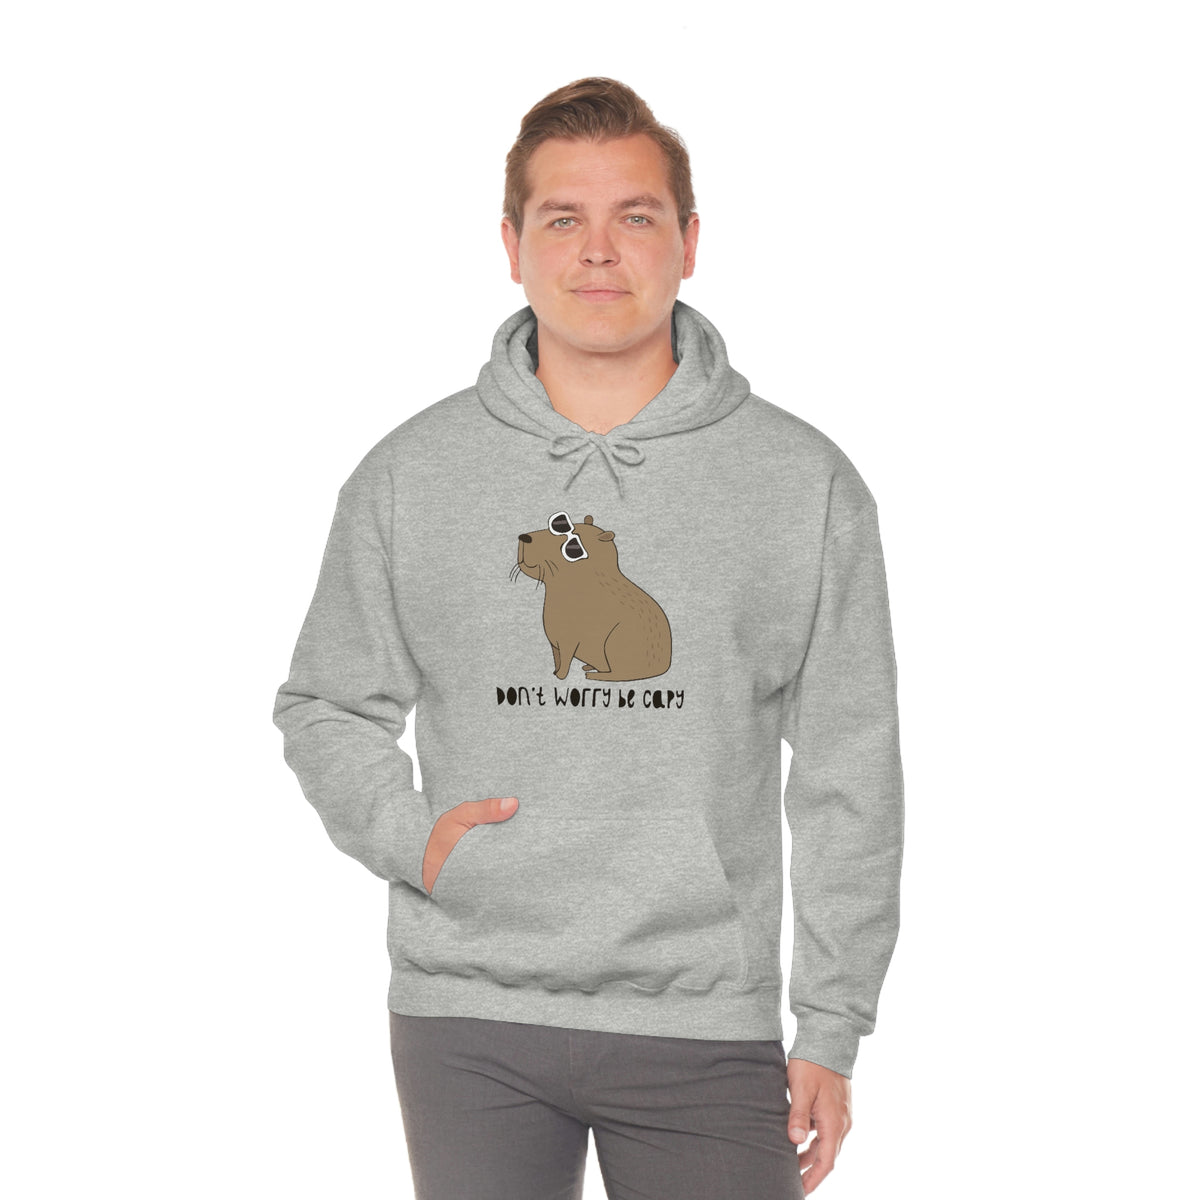 Don't worry BE capy - Unisex Hoodie